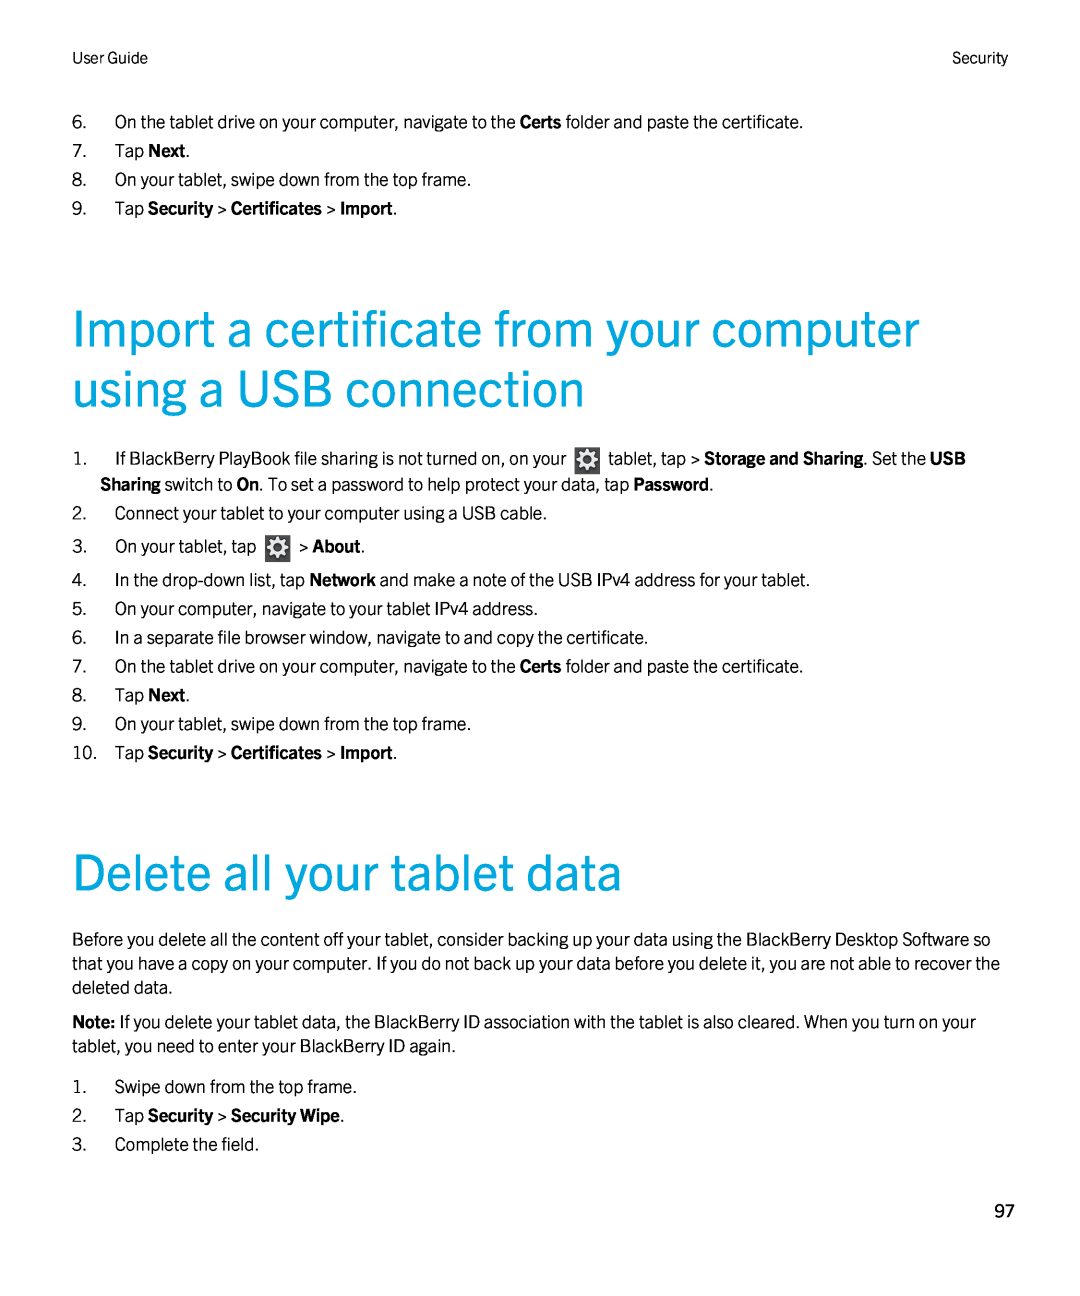 Blackberry 2.0.1 manual Import a certificate from your computer using a USB connection, Delete all your tablet data 